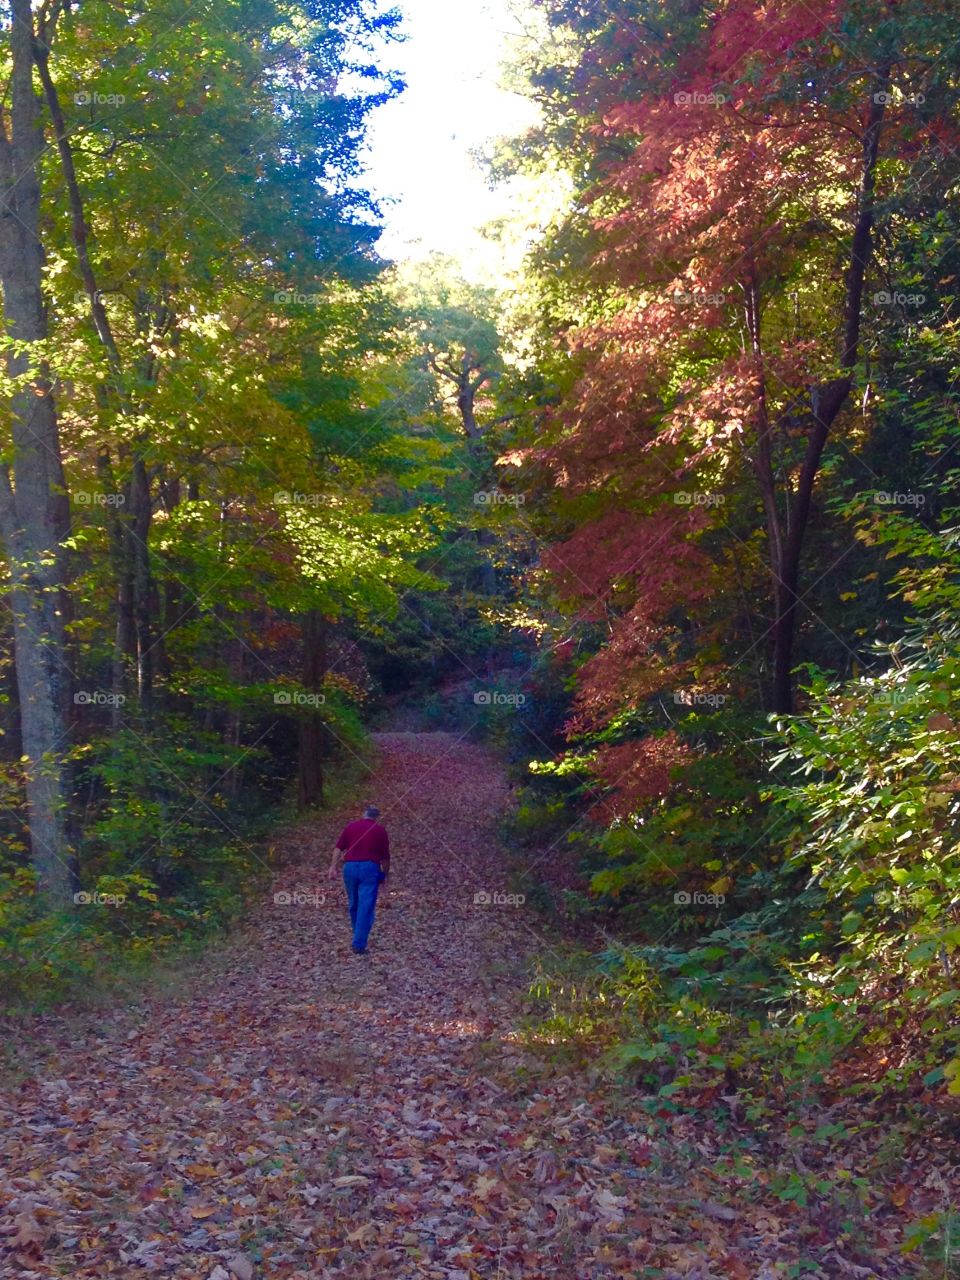 Drawn to walk by fall foliage . Trail hiking in Maggie Valley